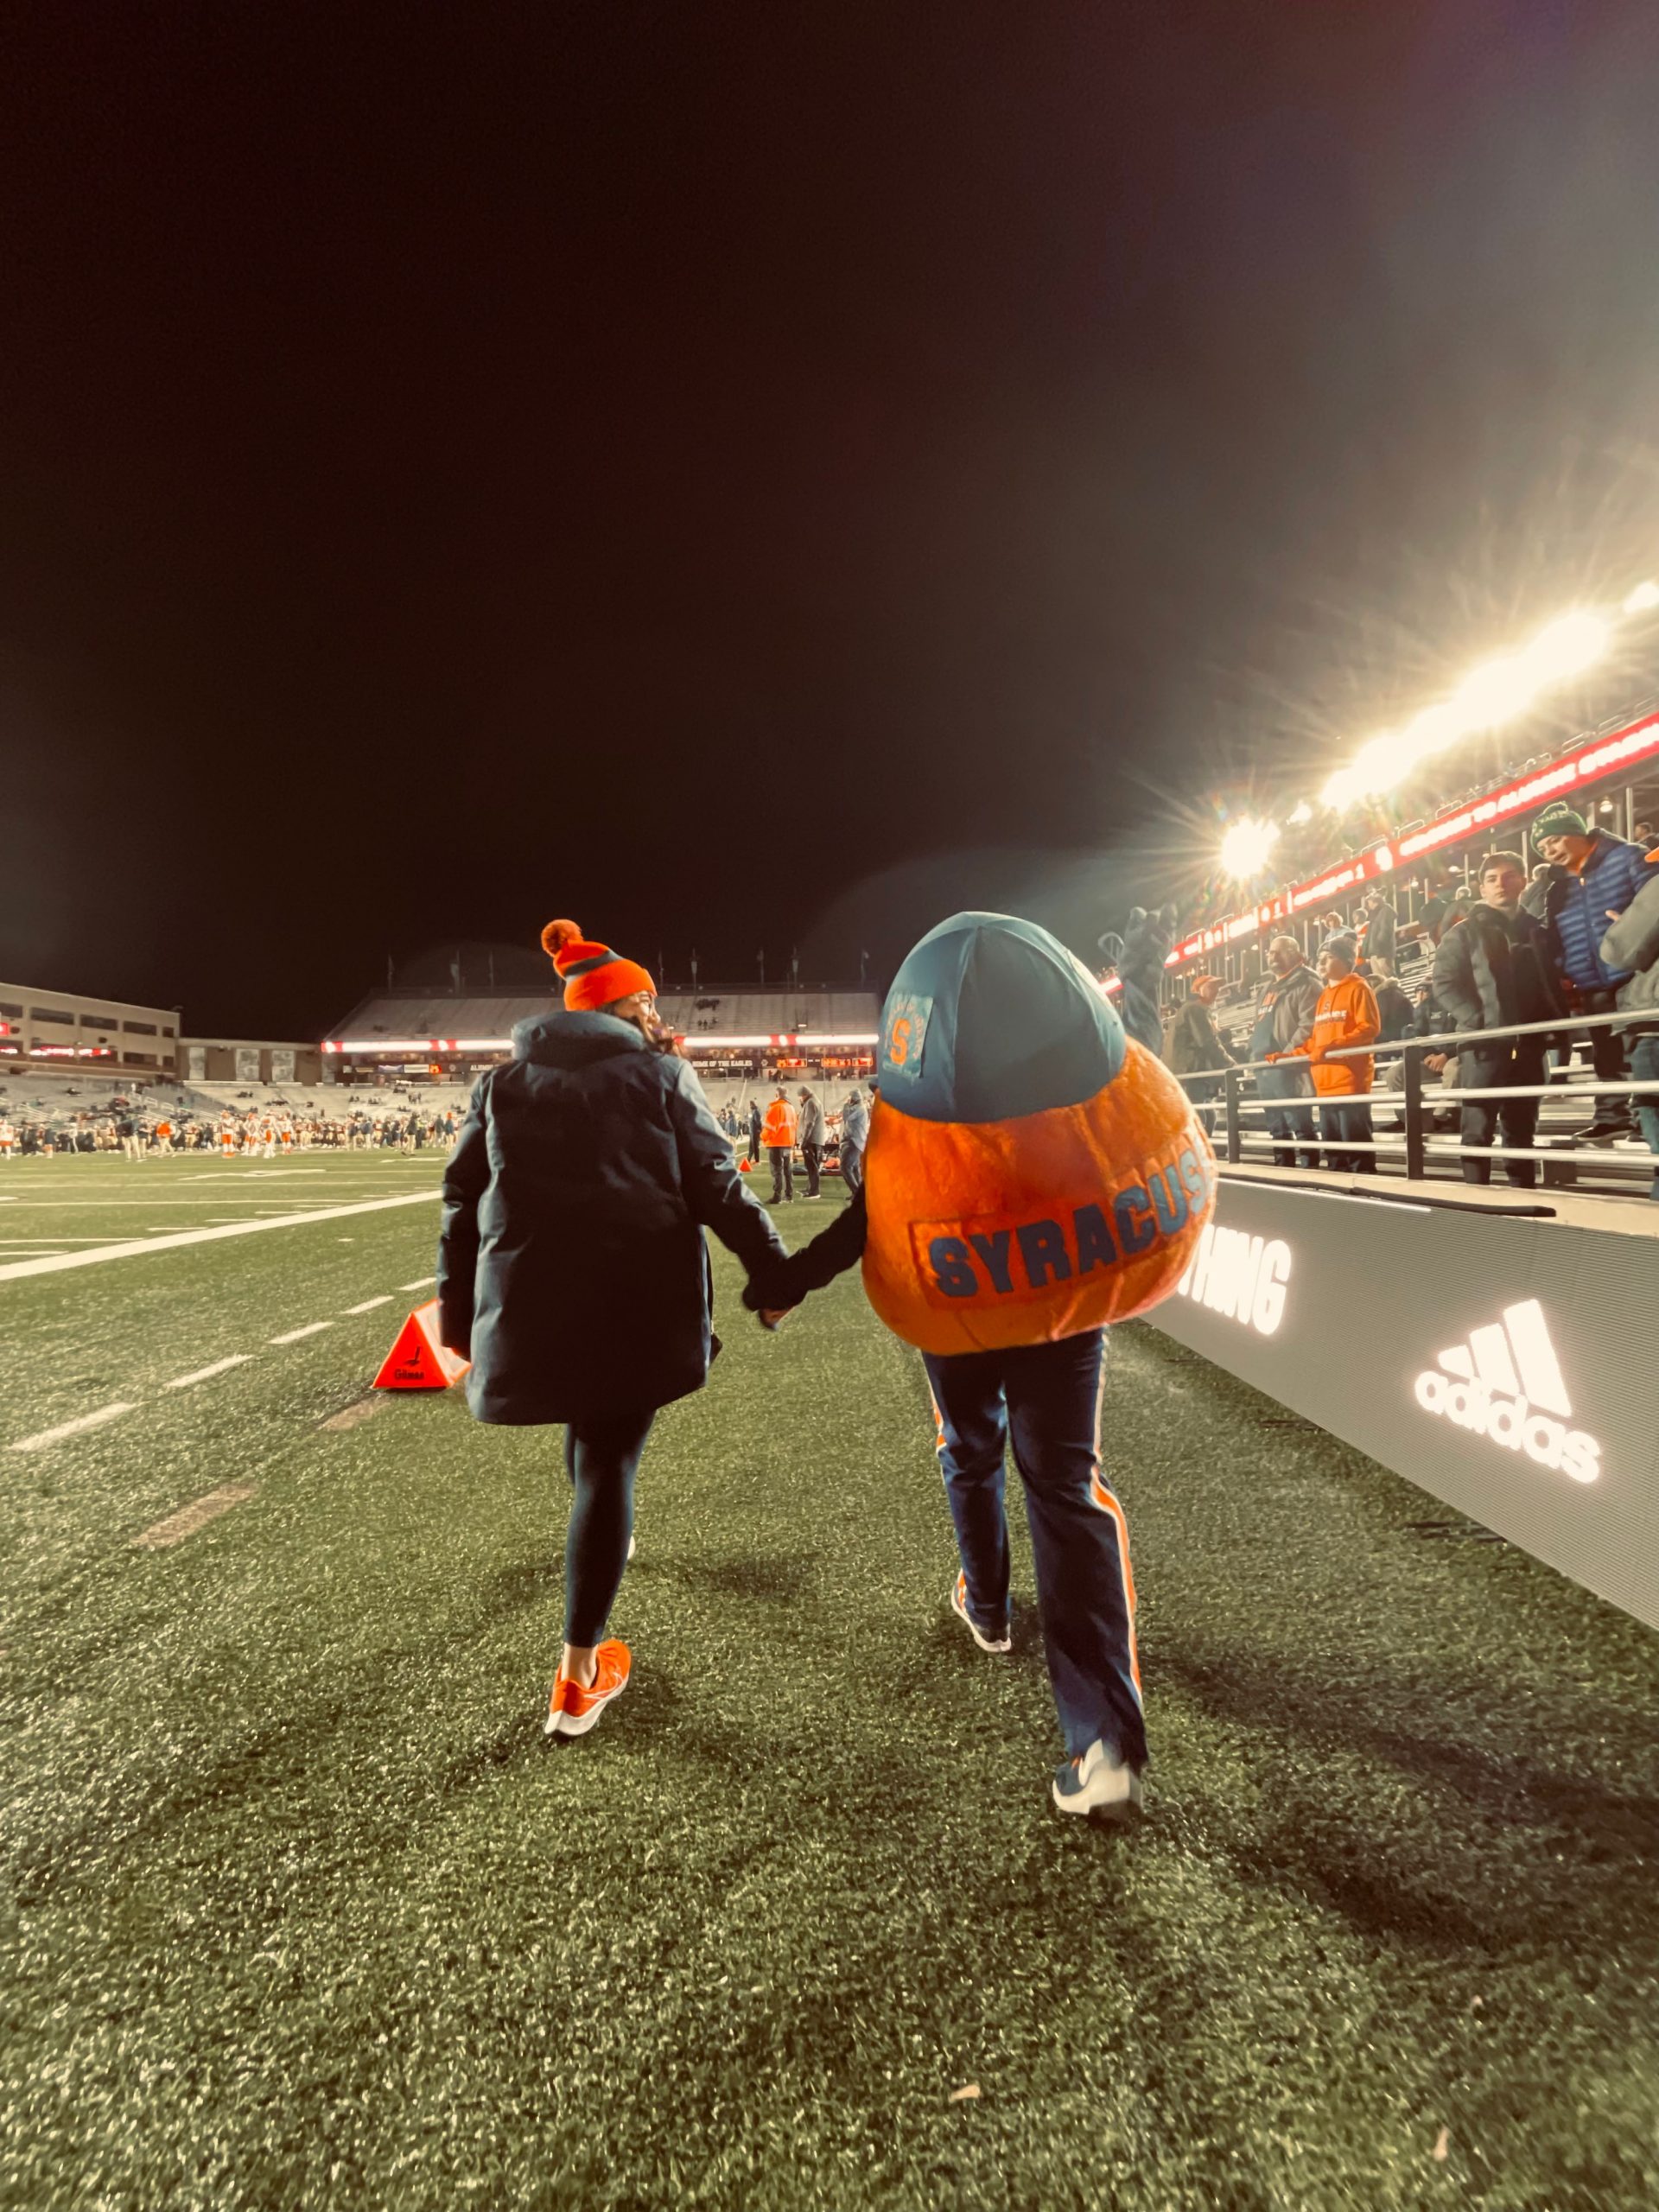 Otto and an individual holding hands walking away from the camera down a football field